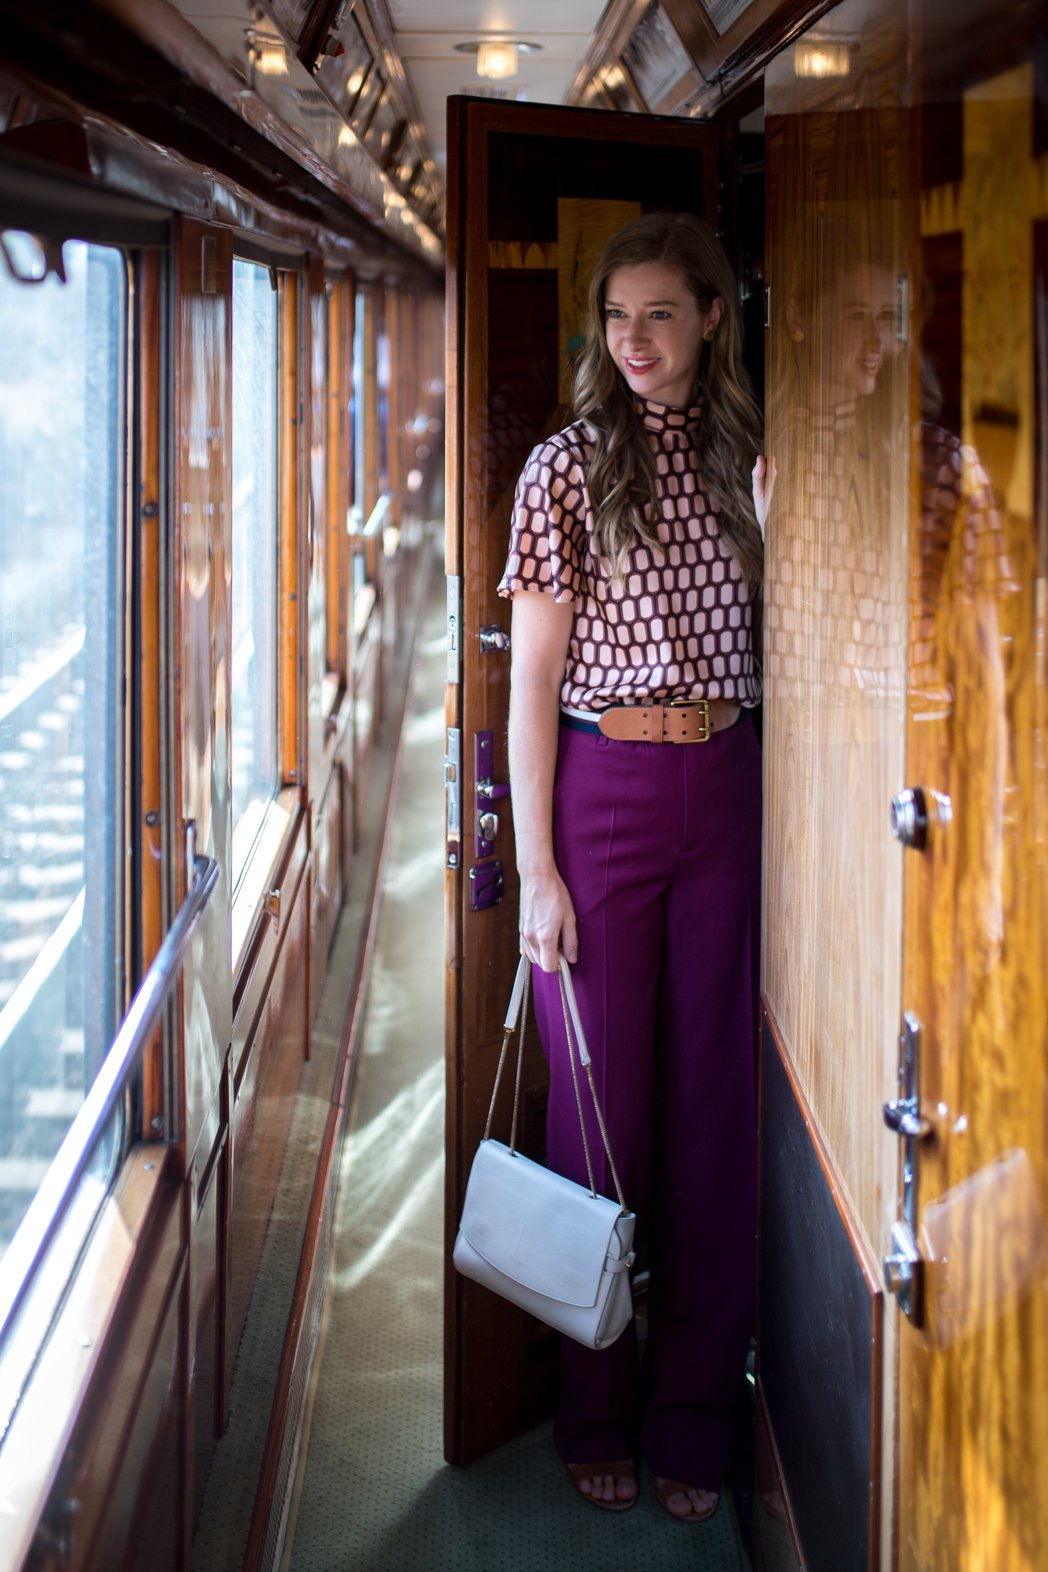 Stylish.ae Diaries: My Thrilling Train Ride On The Orient Express!